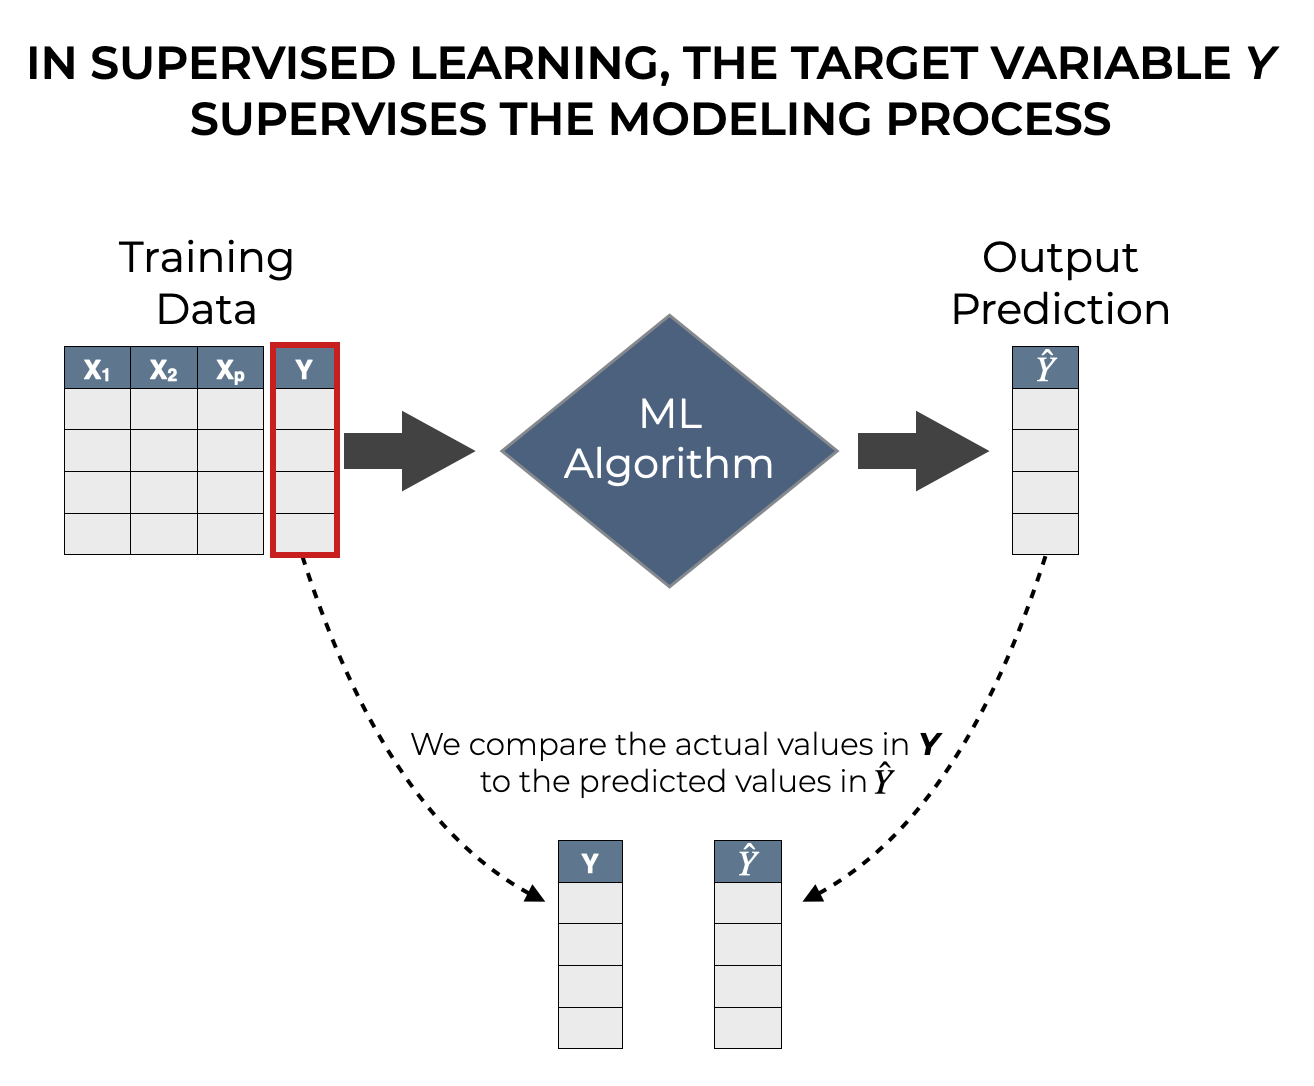 An image that shows how the target variable, Y, supervises the creation of the model in supervised learning.